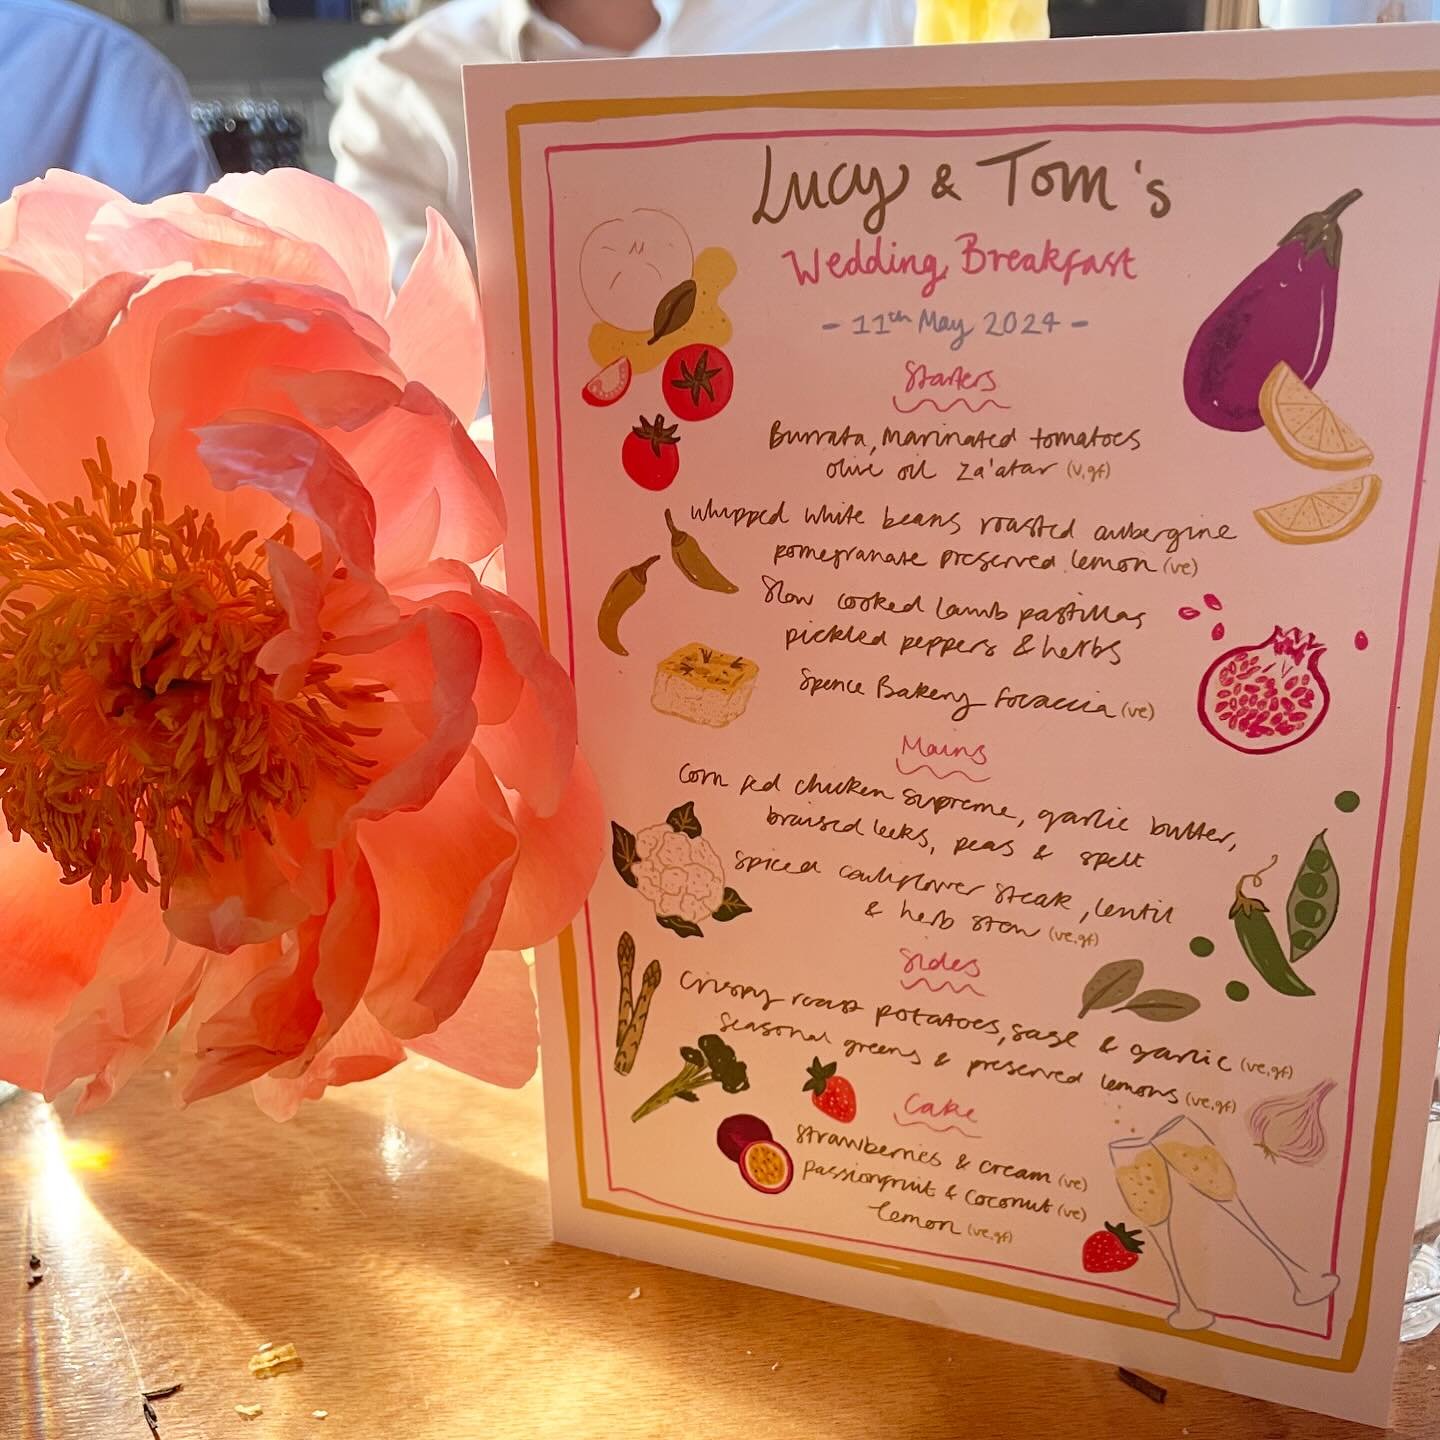 I was honoured to be asked to design these Wedding Breakfast menus for Tom and Lucy&rsquo;s colourful wedding in Hampstead last weekend. The bride told me the colour palette was &lsquo;yellow, blue, pink, green, orange and lilac&rsquo; basically all 